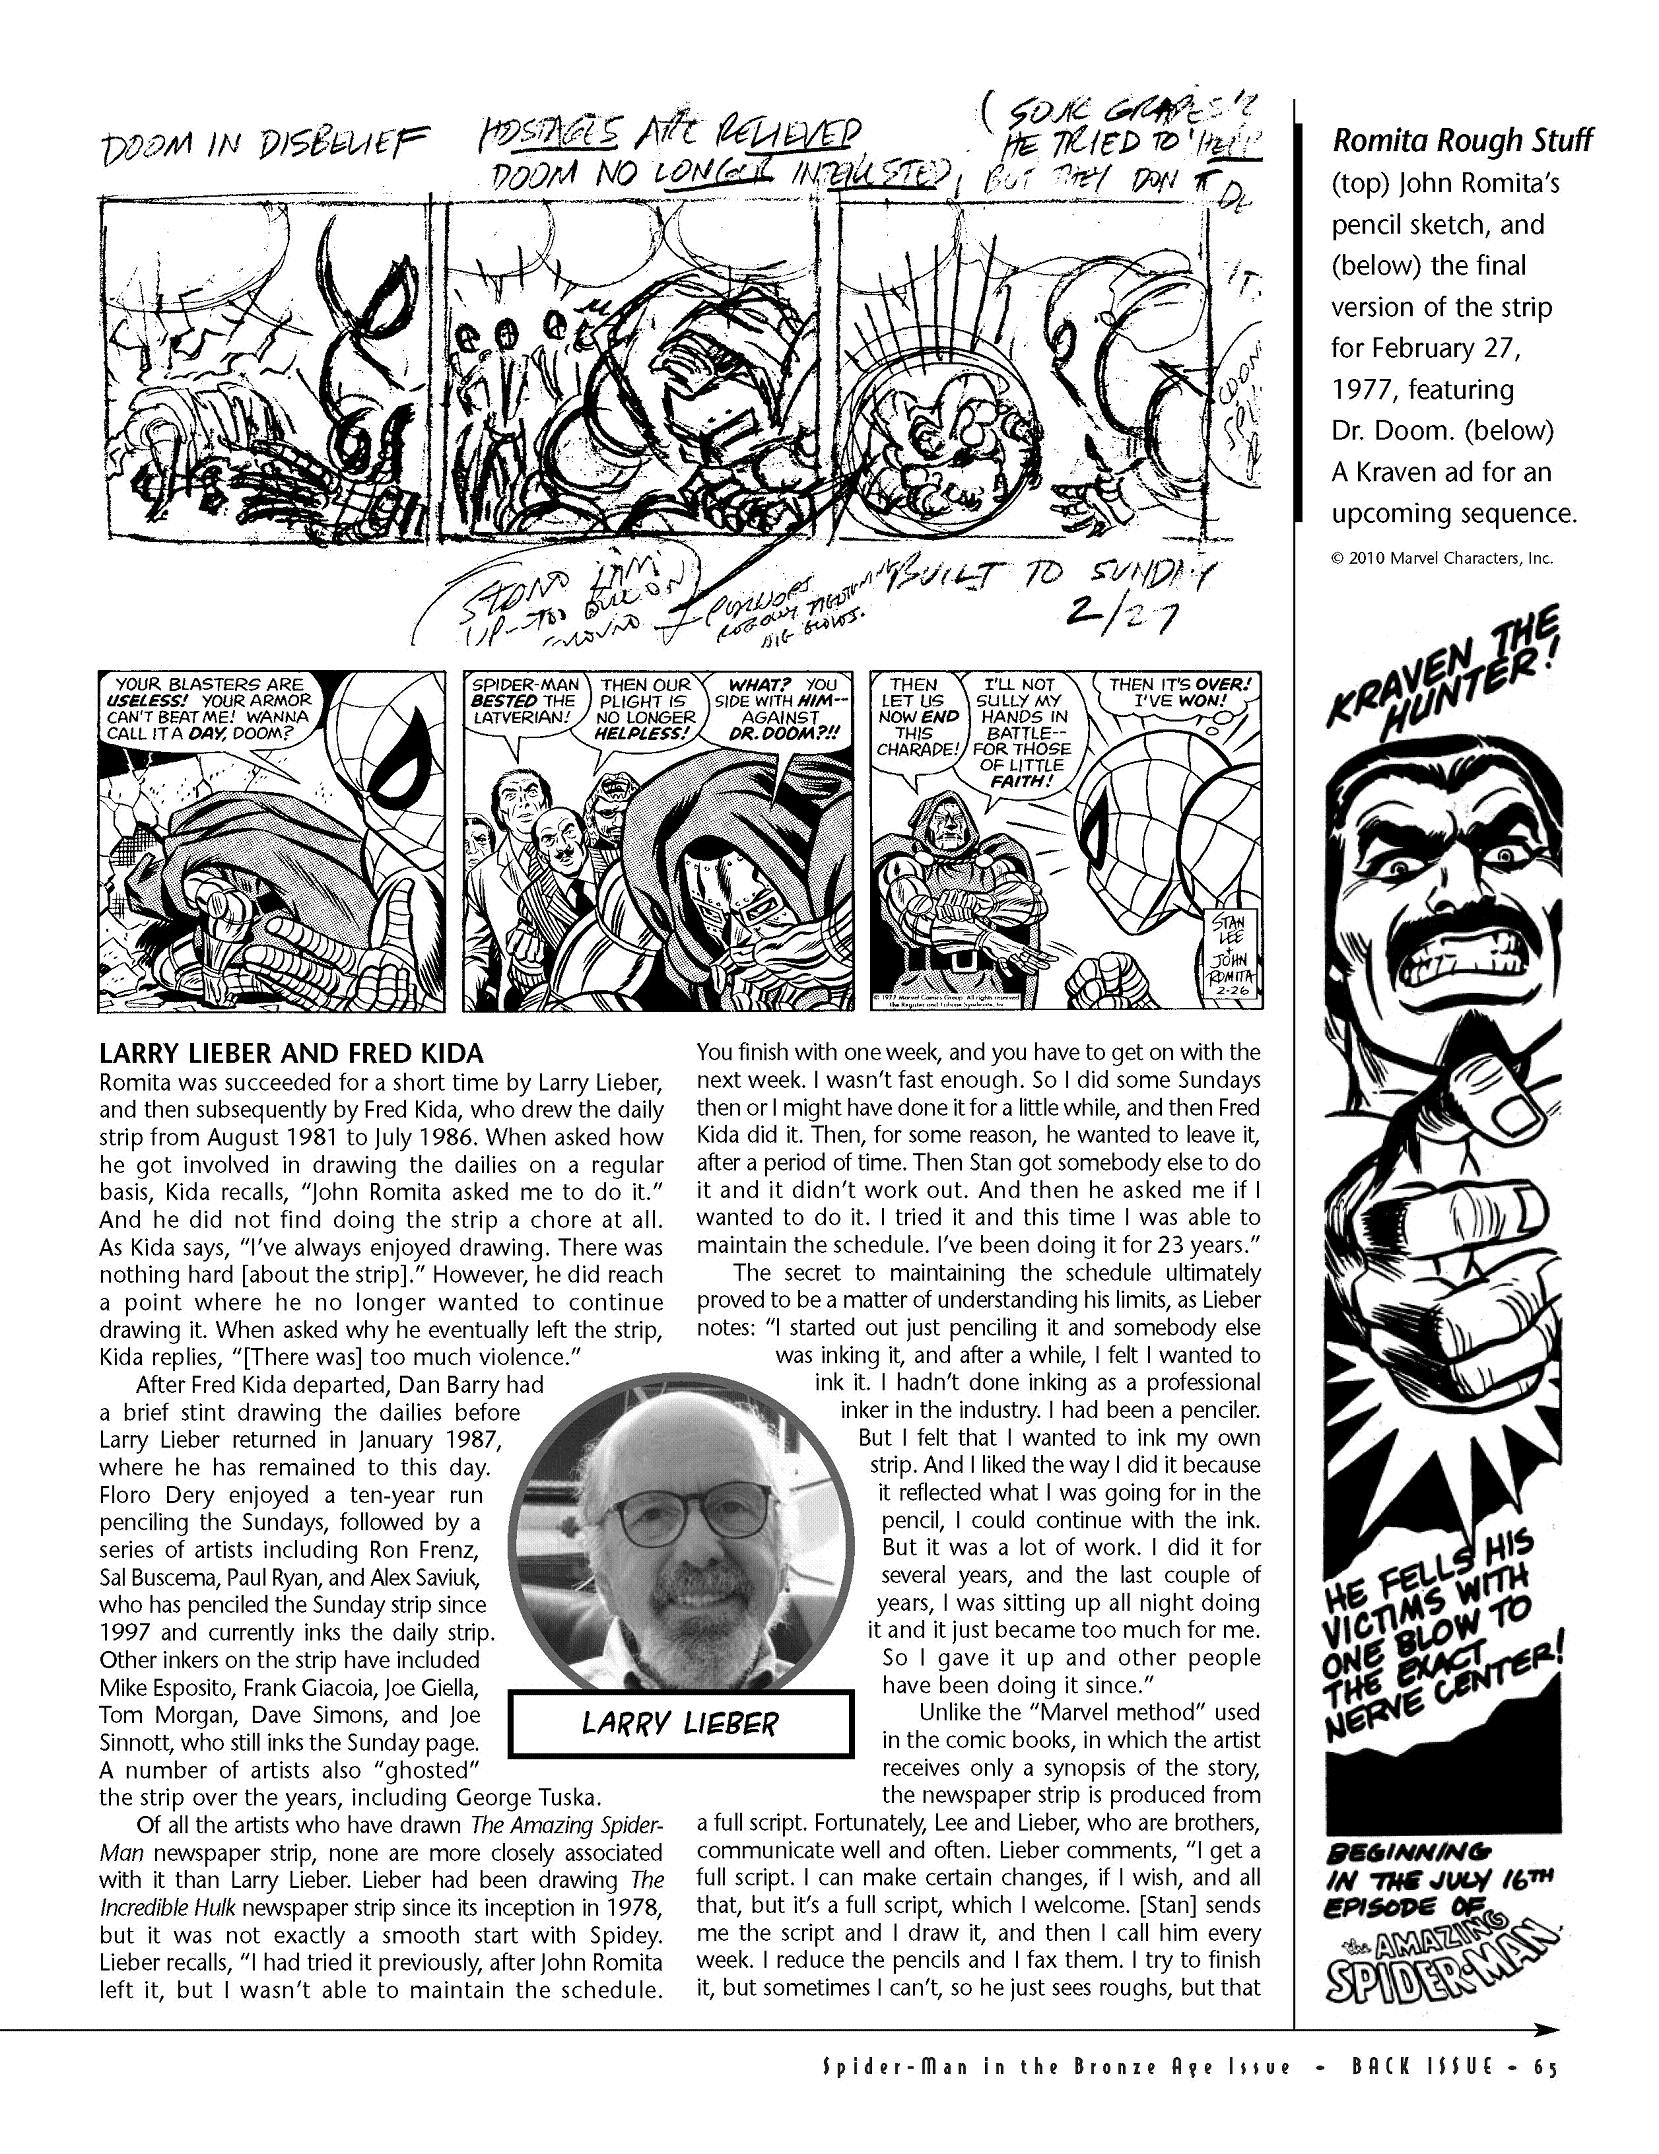 Read online Back Issue comic -  Issue #44 - 66